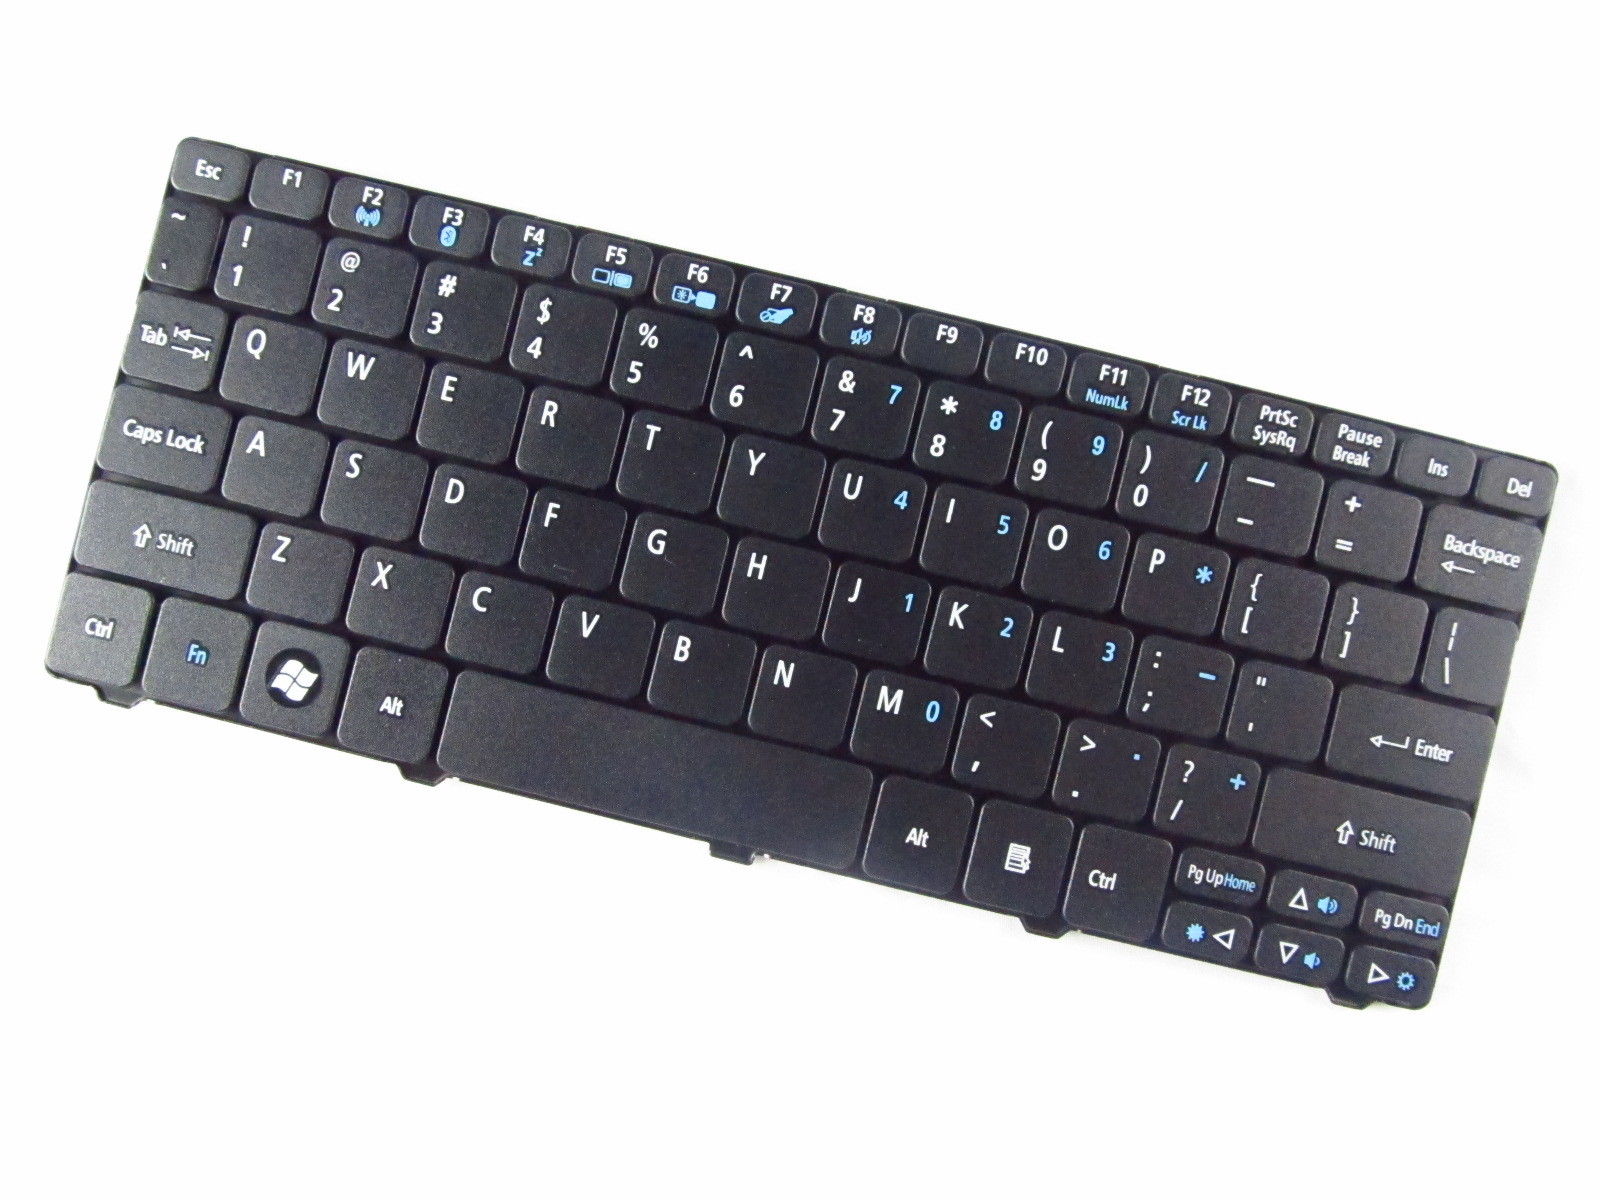 Sony Laptop Keyboard Repair/replacement in chennai